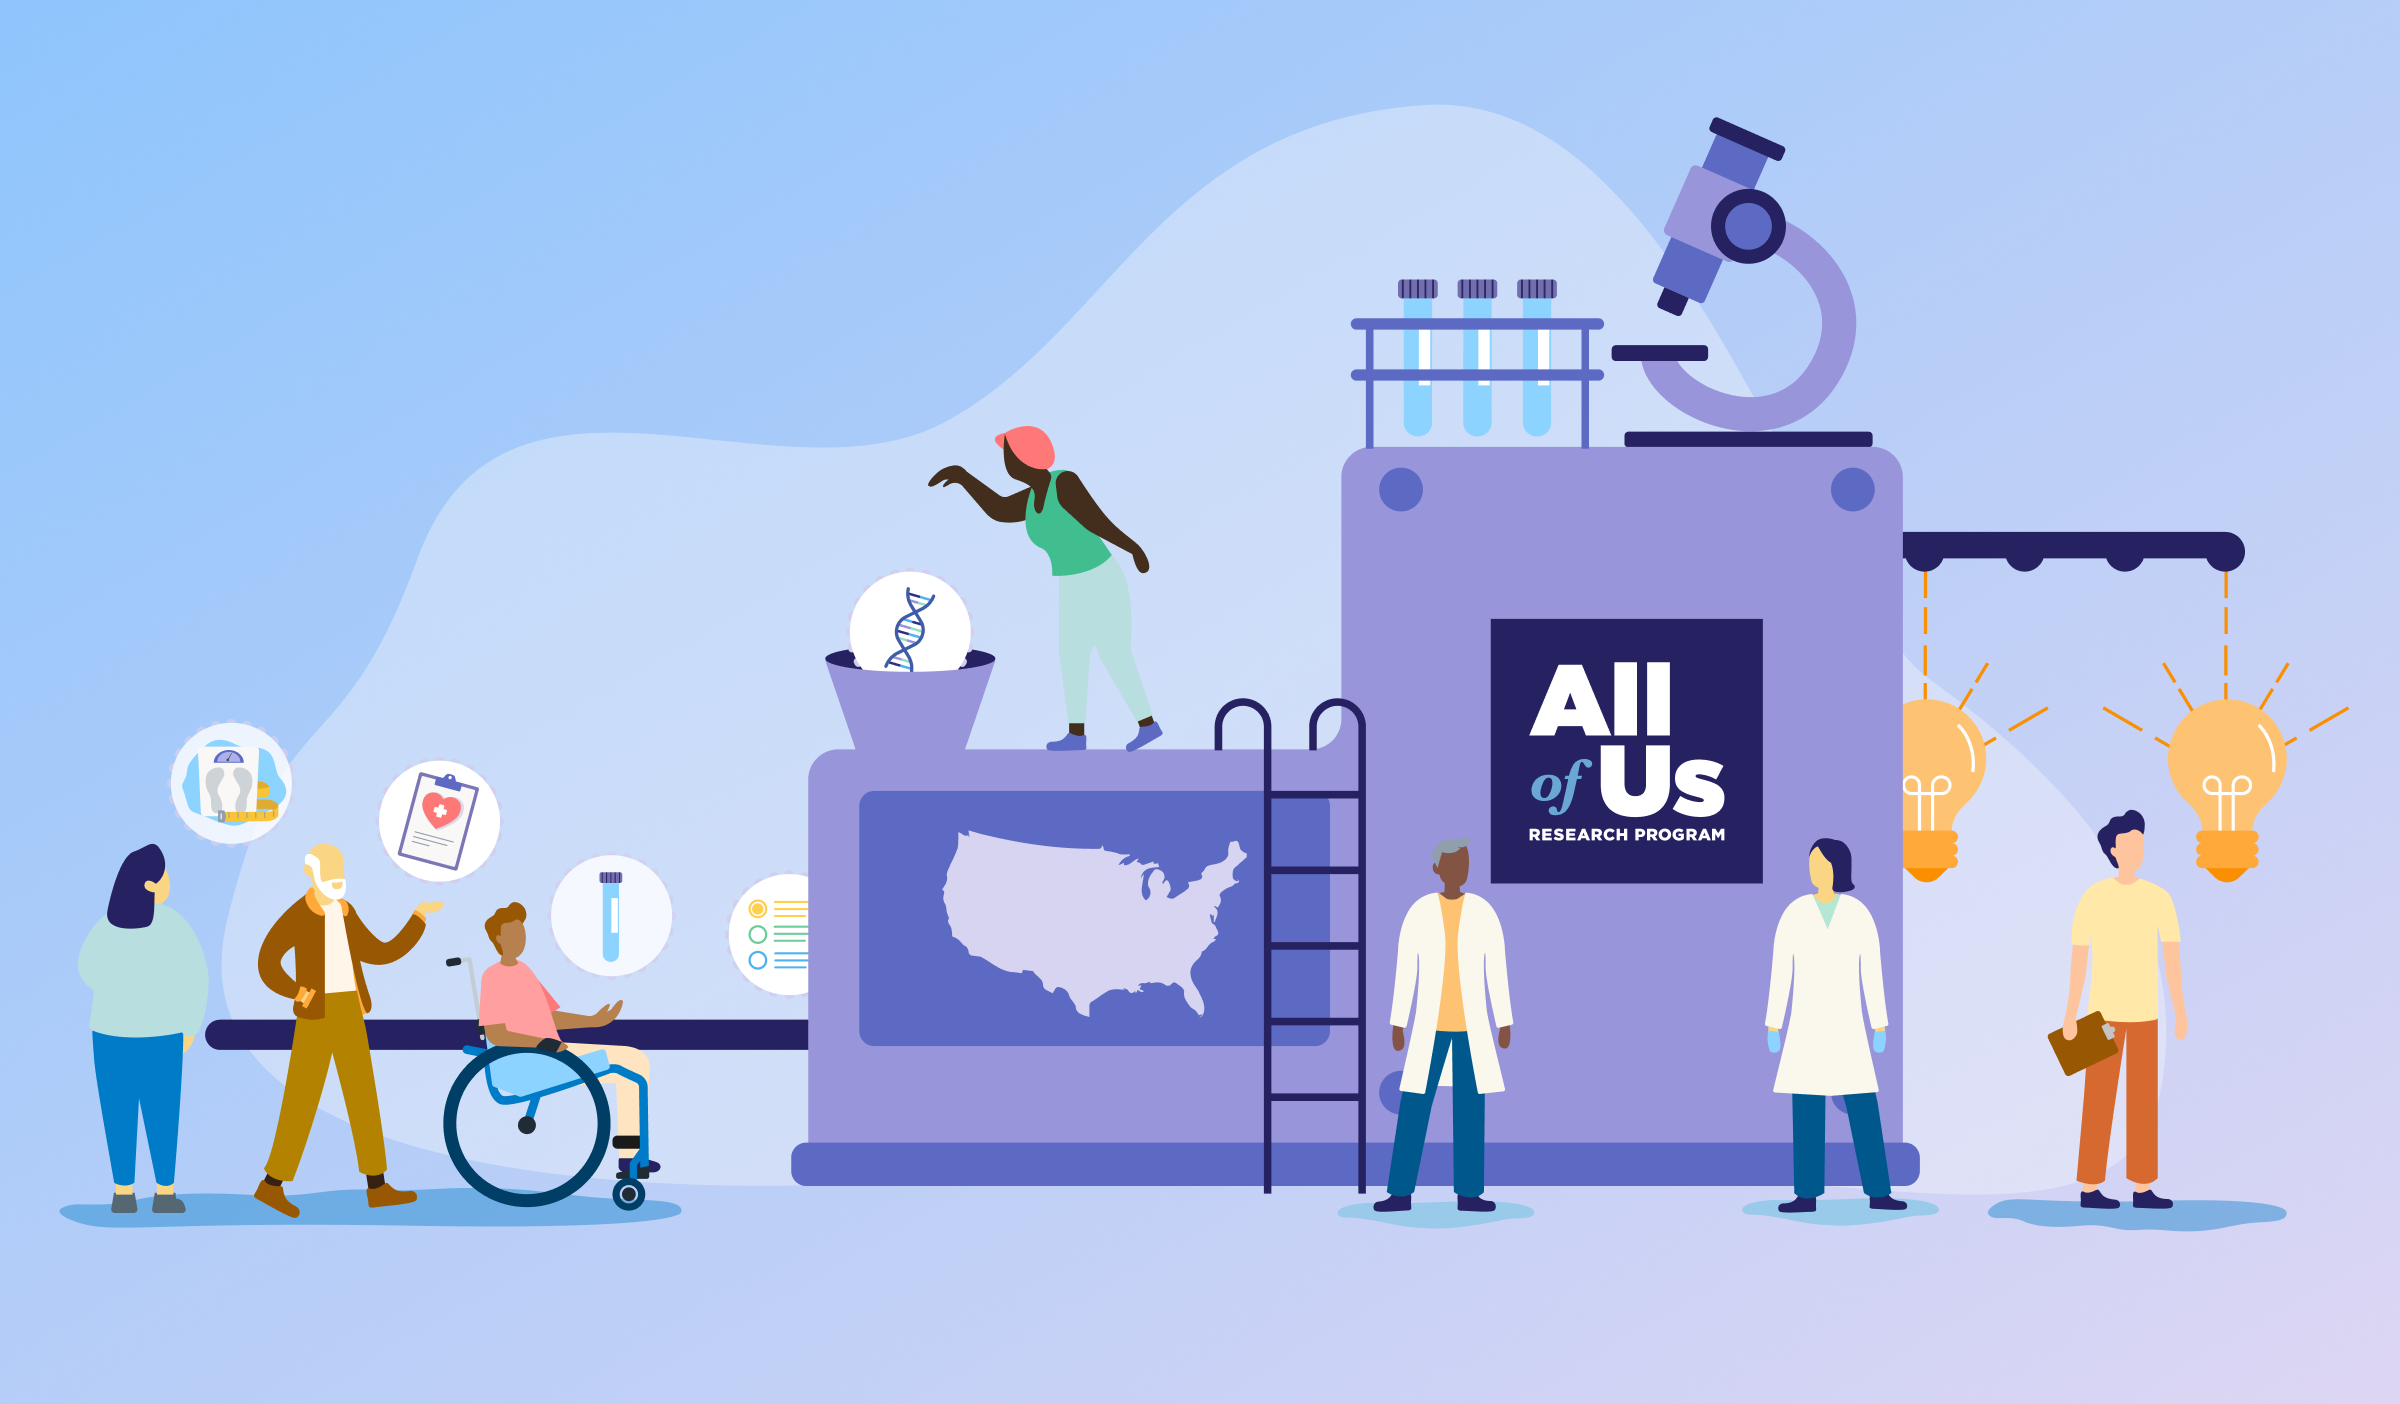 all of us signup graphic, showing patients with data in white circles on the left, tossing them into a hopper of a great machine, and on the right, a sciency section of the machine with scientists and the All of Us logo printed on the side facing us, all illustrated in a cartoonish style, culminating in shiny light bulbs coming out of the machine on the right with a person holding a clipboard and wearing a yellow t shirt